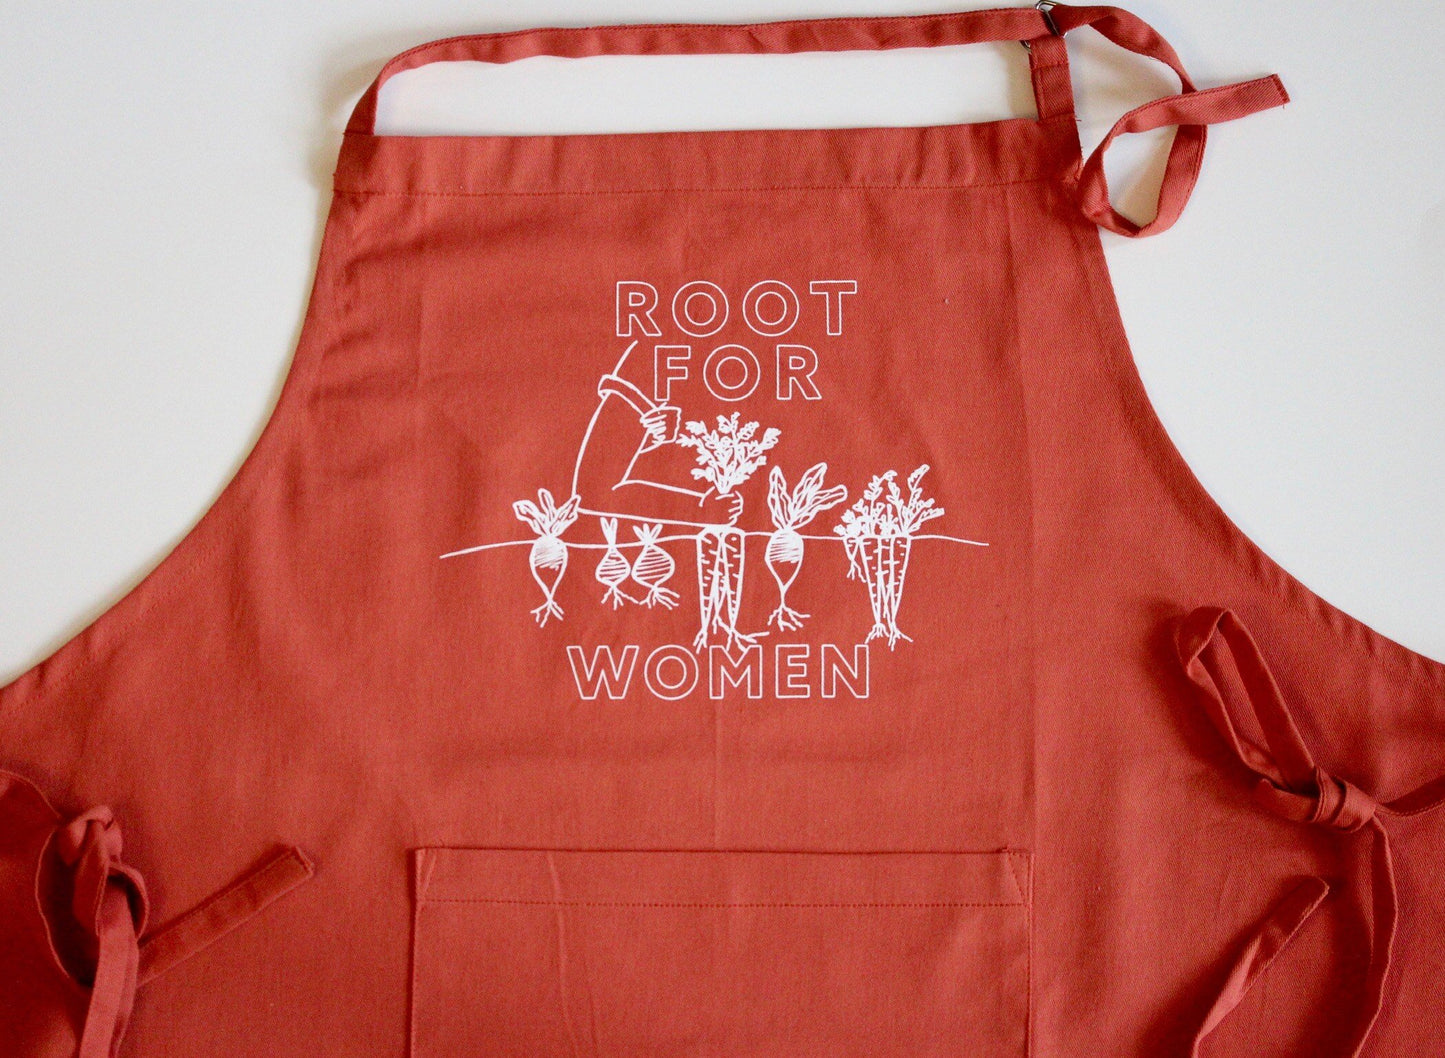 A carrot orange apron that reads "Root for Women" in white block letters with garden illustration